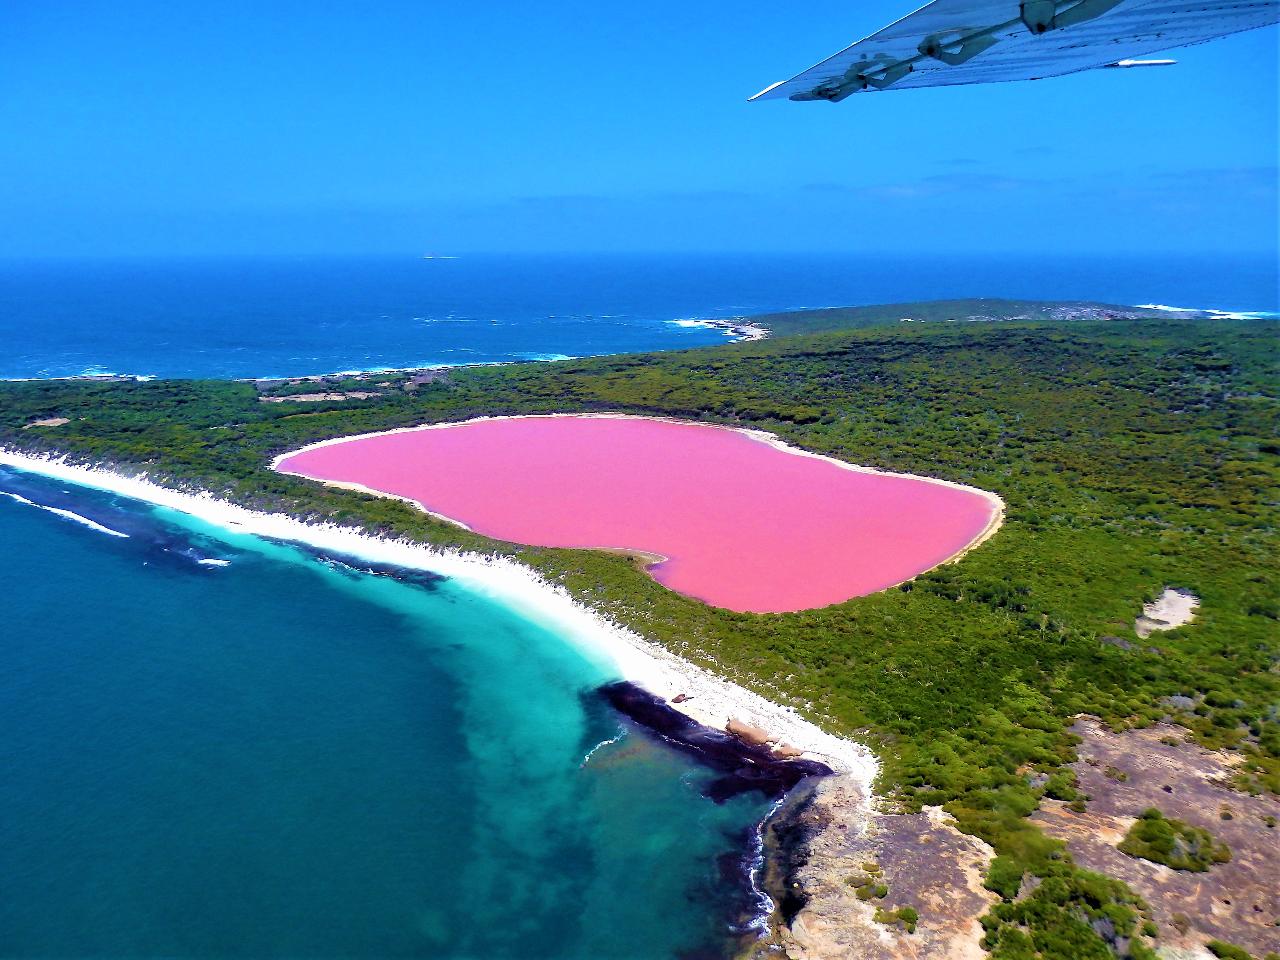 Lake Hillier-Middle Island Early Bird Special